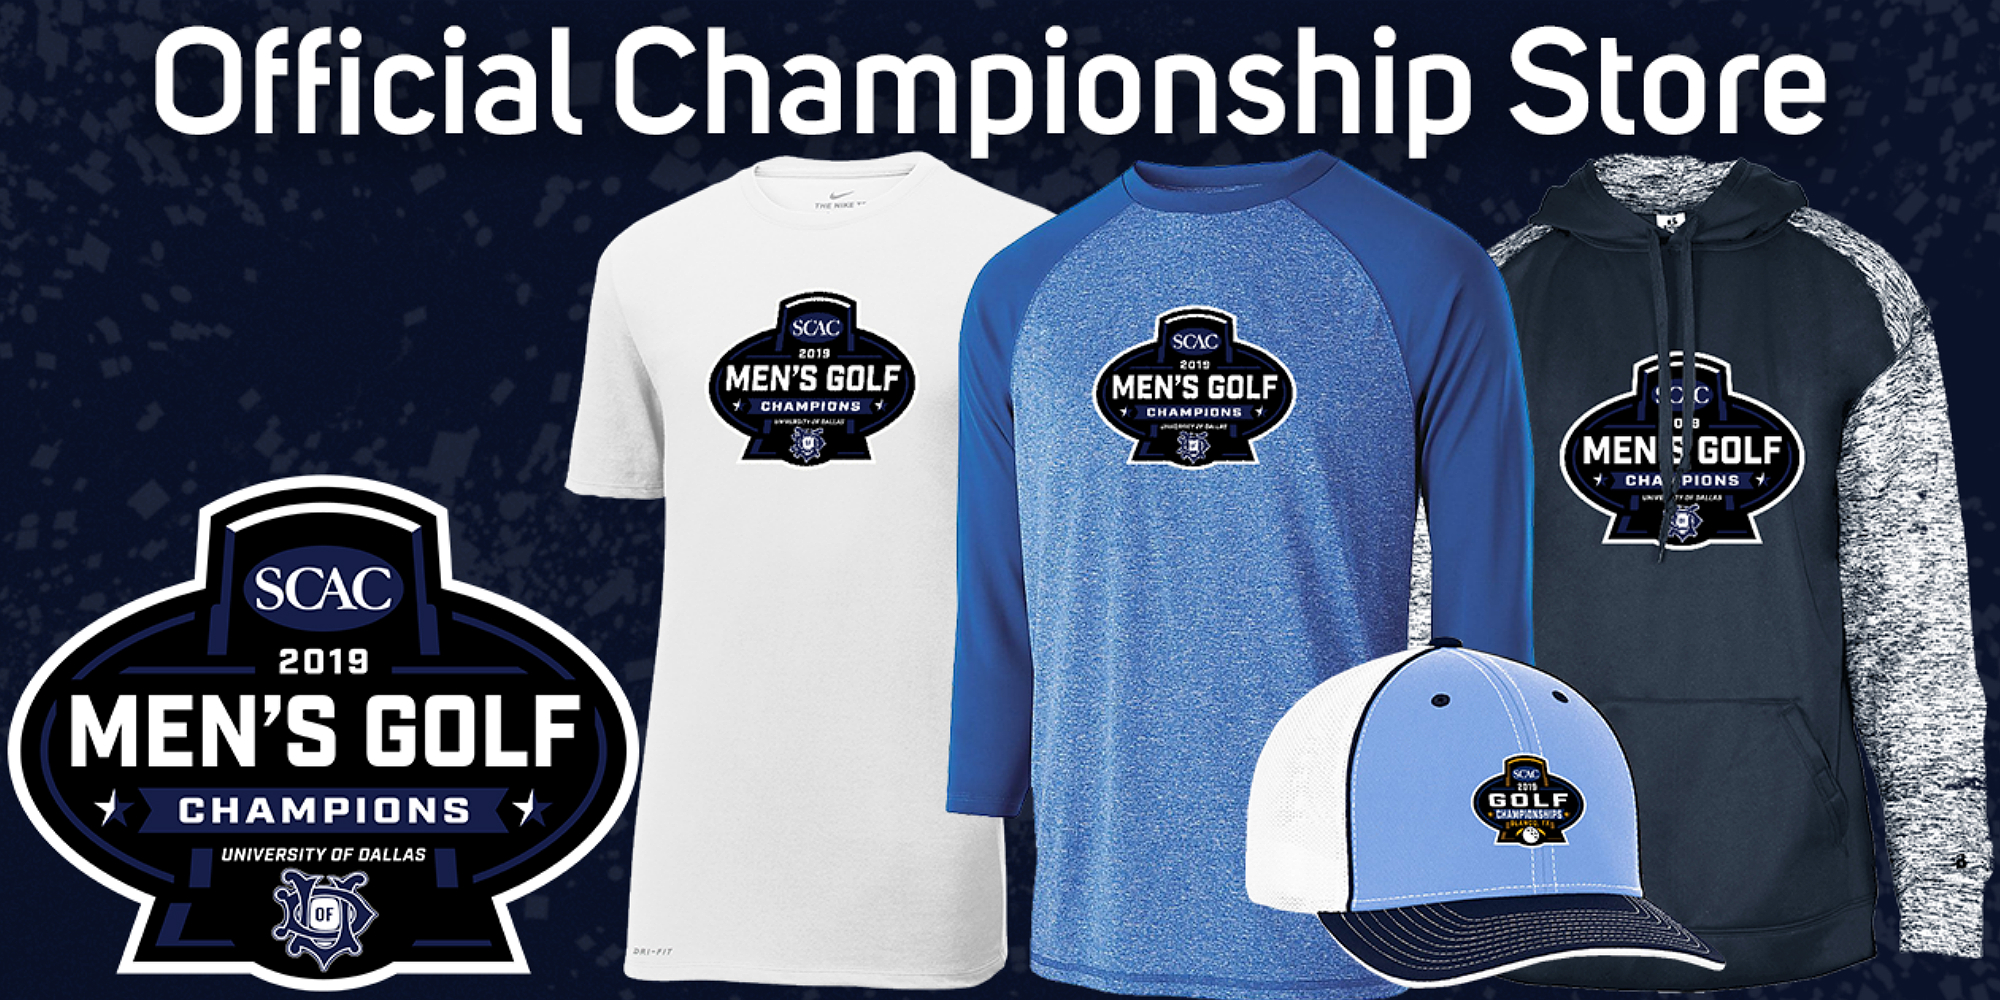 Purchase Your Own Piece of Championship Merchandise